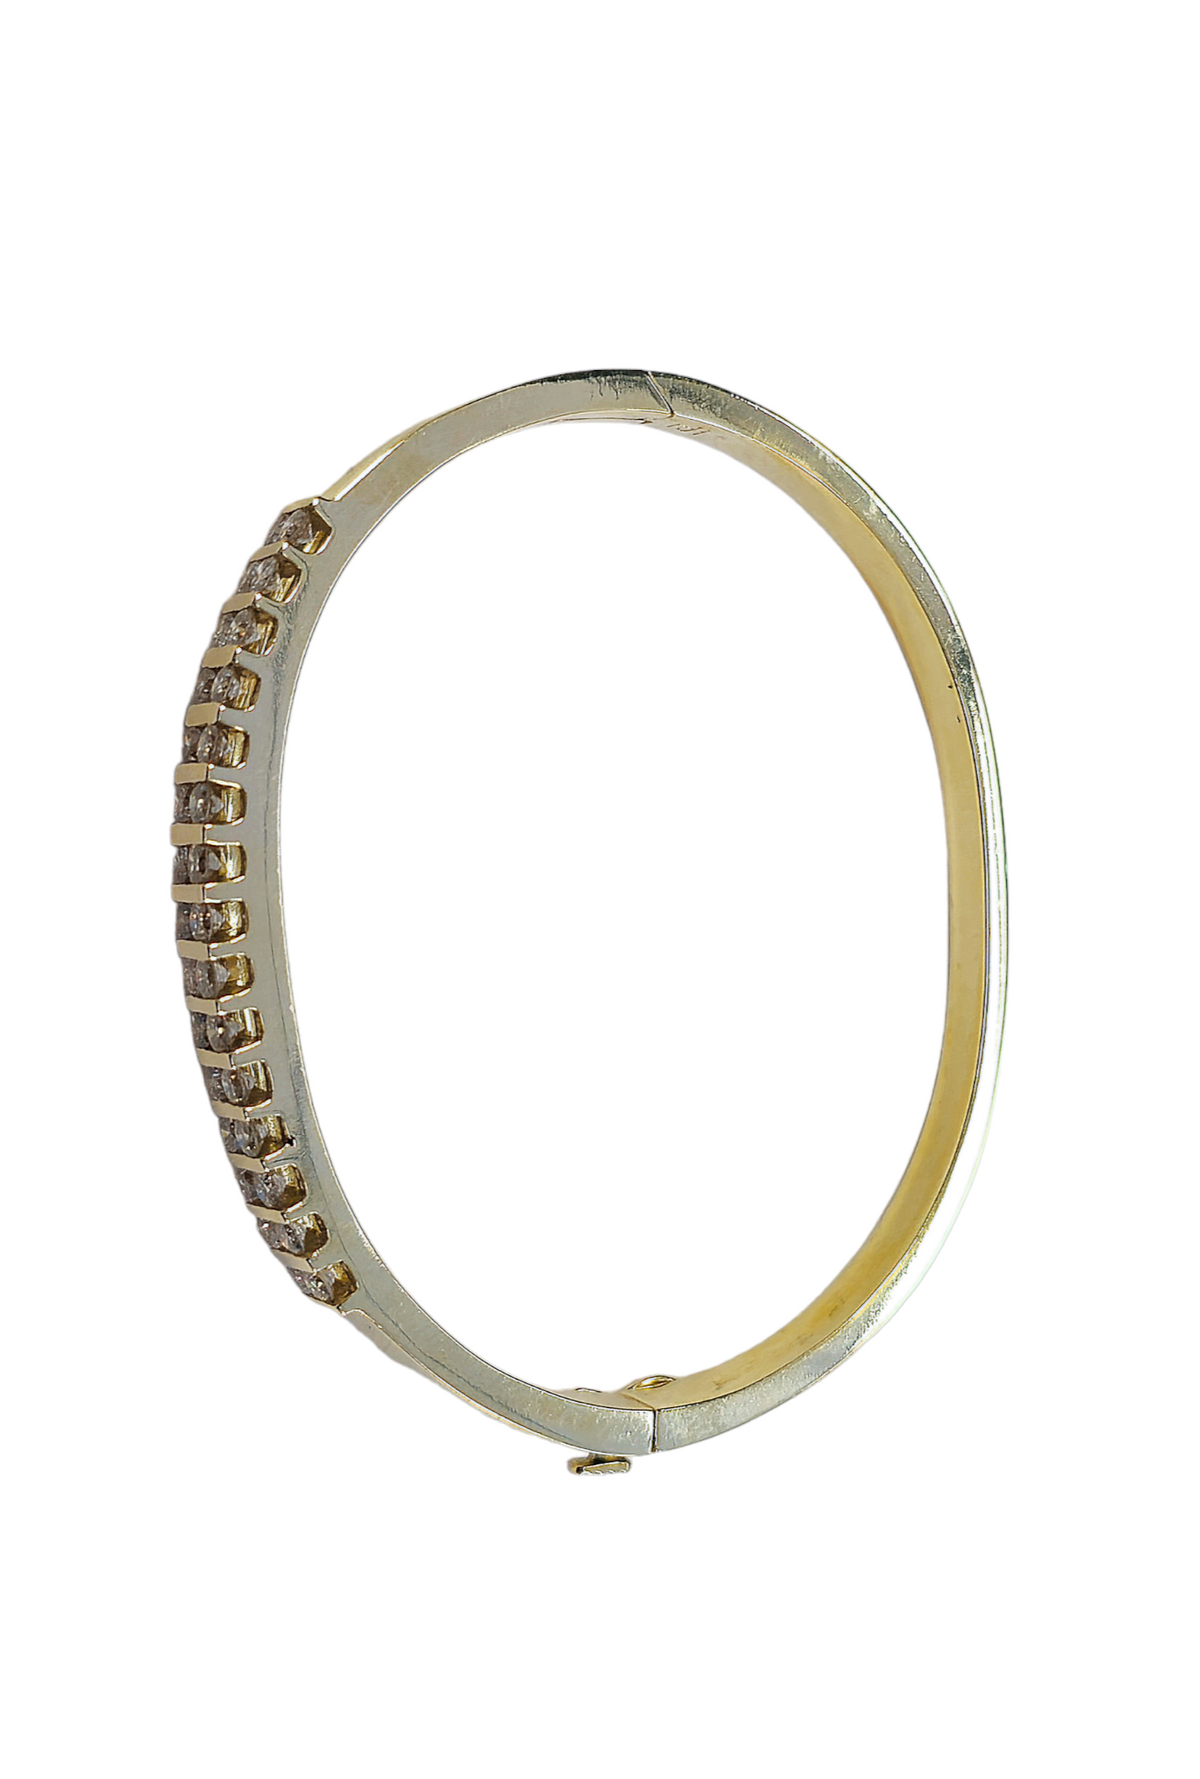 Natural diamond 2.40 CTTW double channel set bangle made in solid 14-karat yellow gold